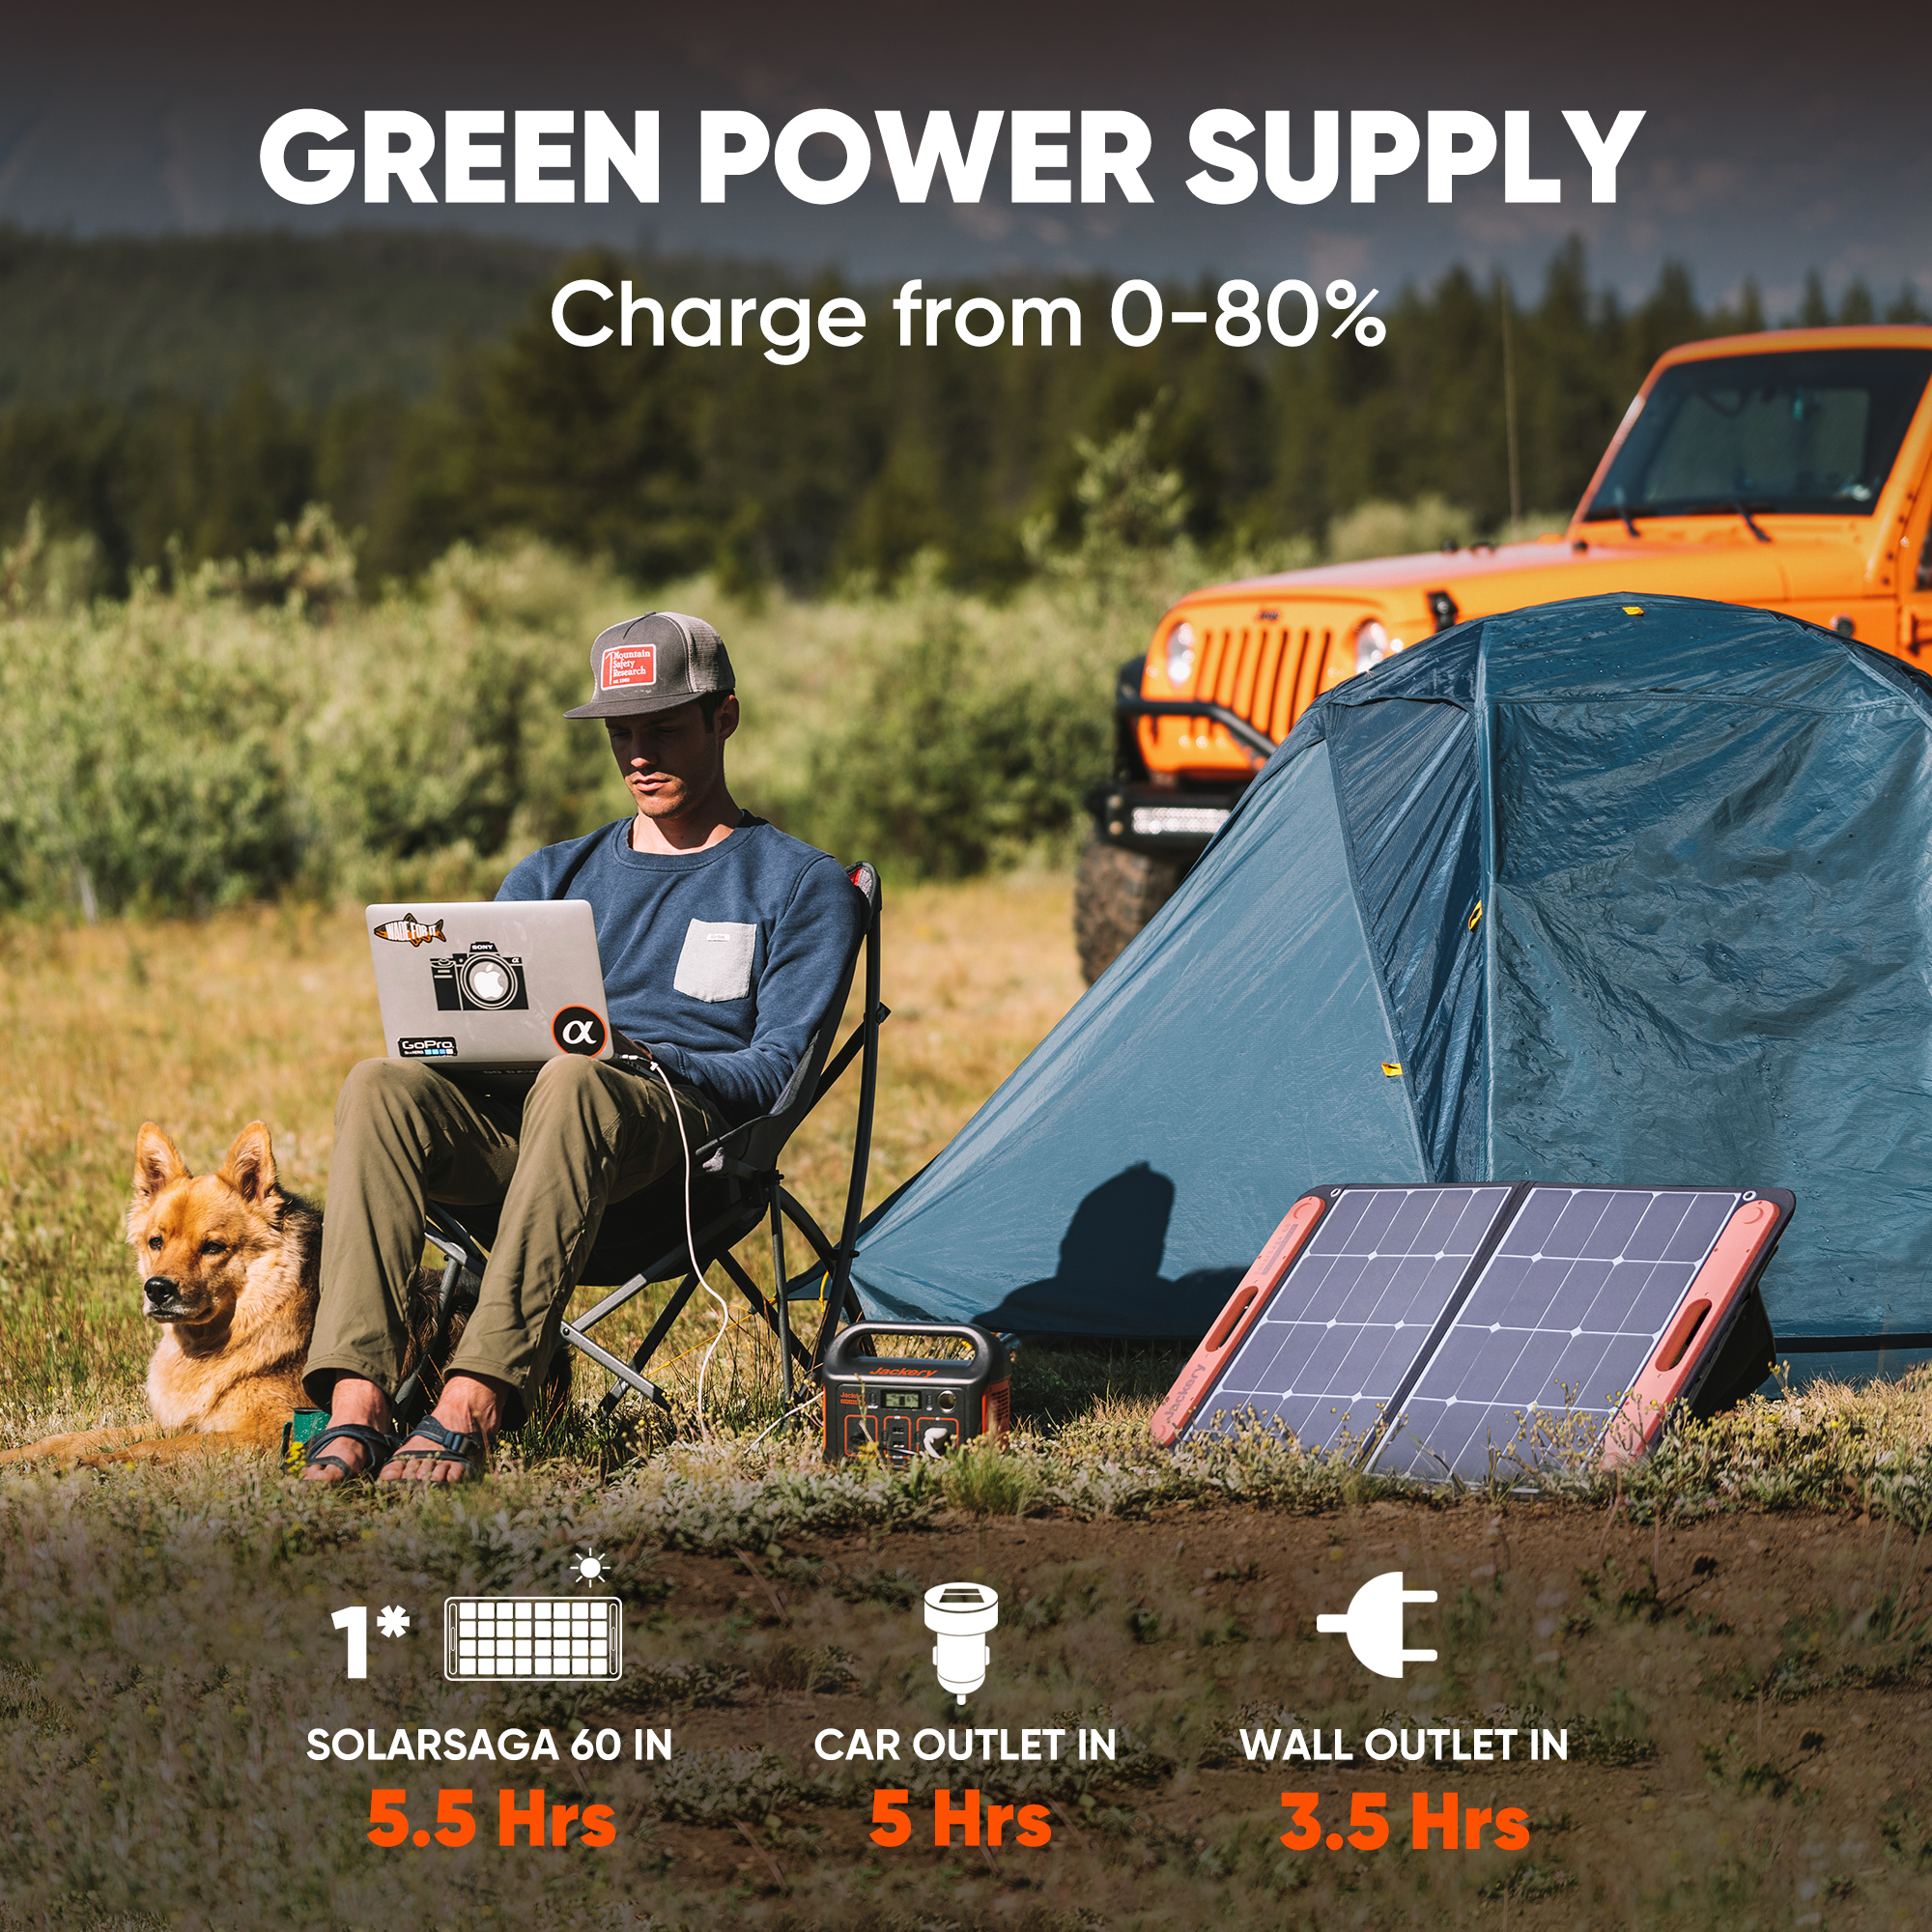 Jackery Portable Power Station Explorer 240, 240Wh Backup Lithium Battery, 110V/200W Pure Sine Wave AC Outlet, Solar Generator for Outdoors Camping Travel Hunting Emergency (Solar Panel Optional) - image 3 of 5